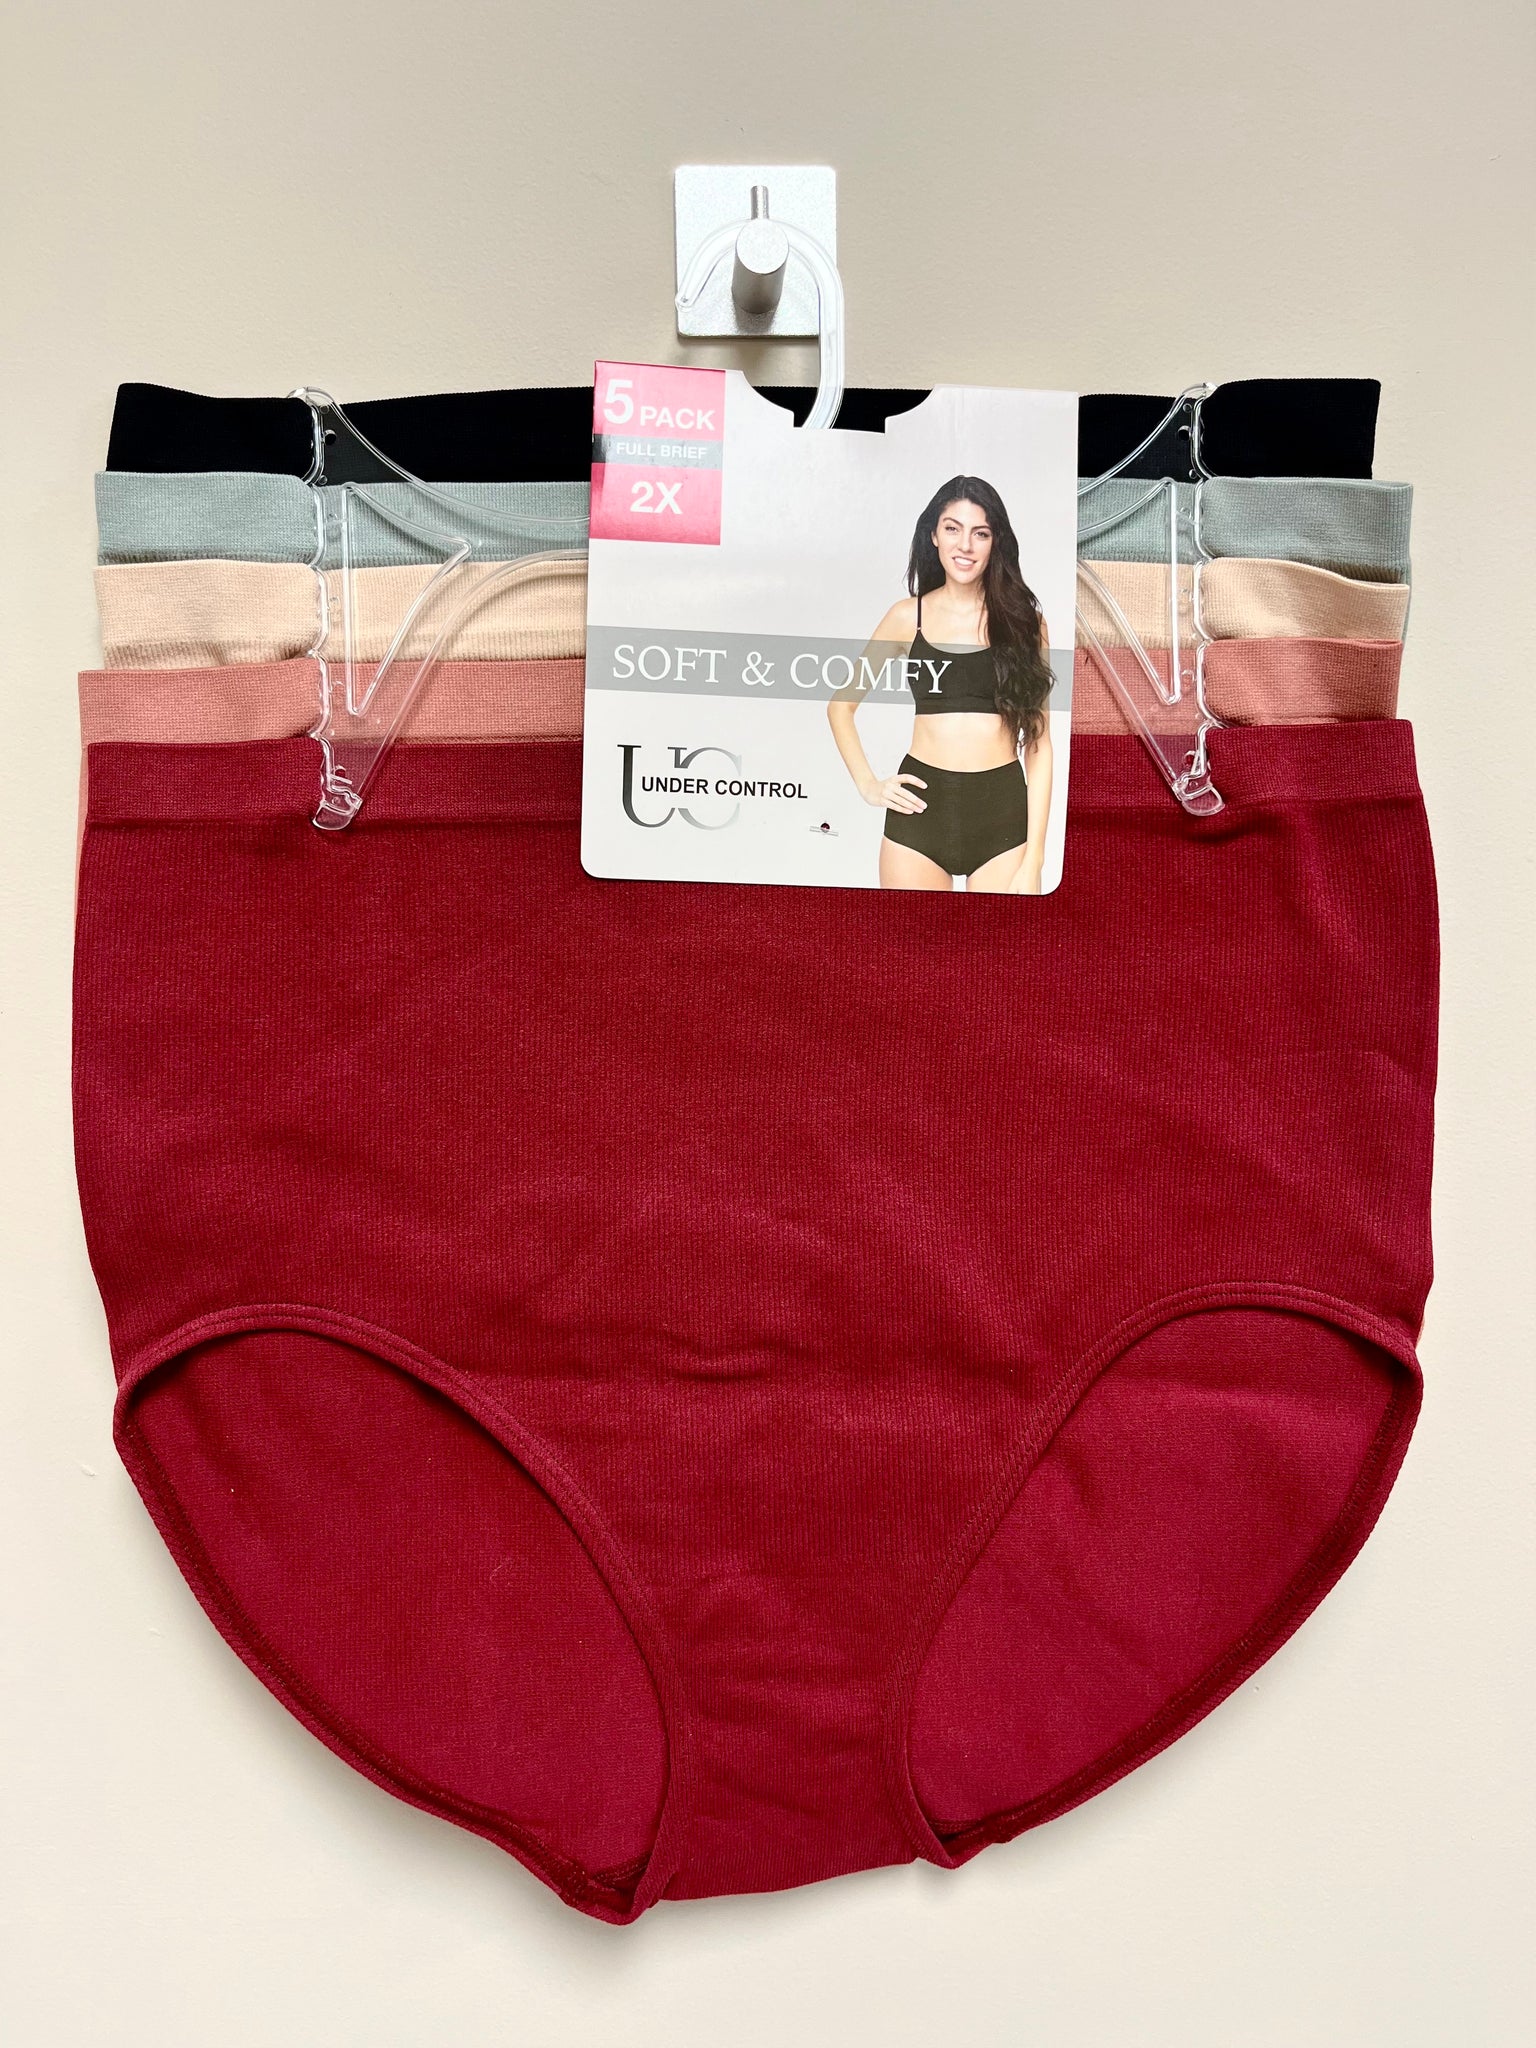 Short Knickers 5 Pack, Lingerie